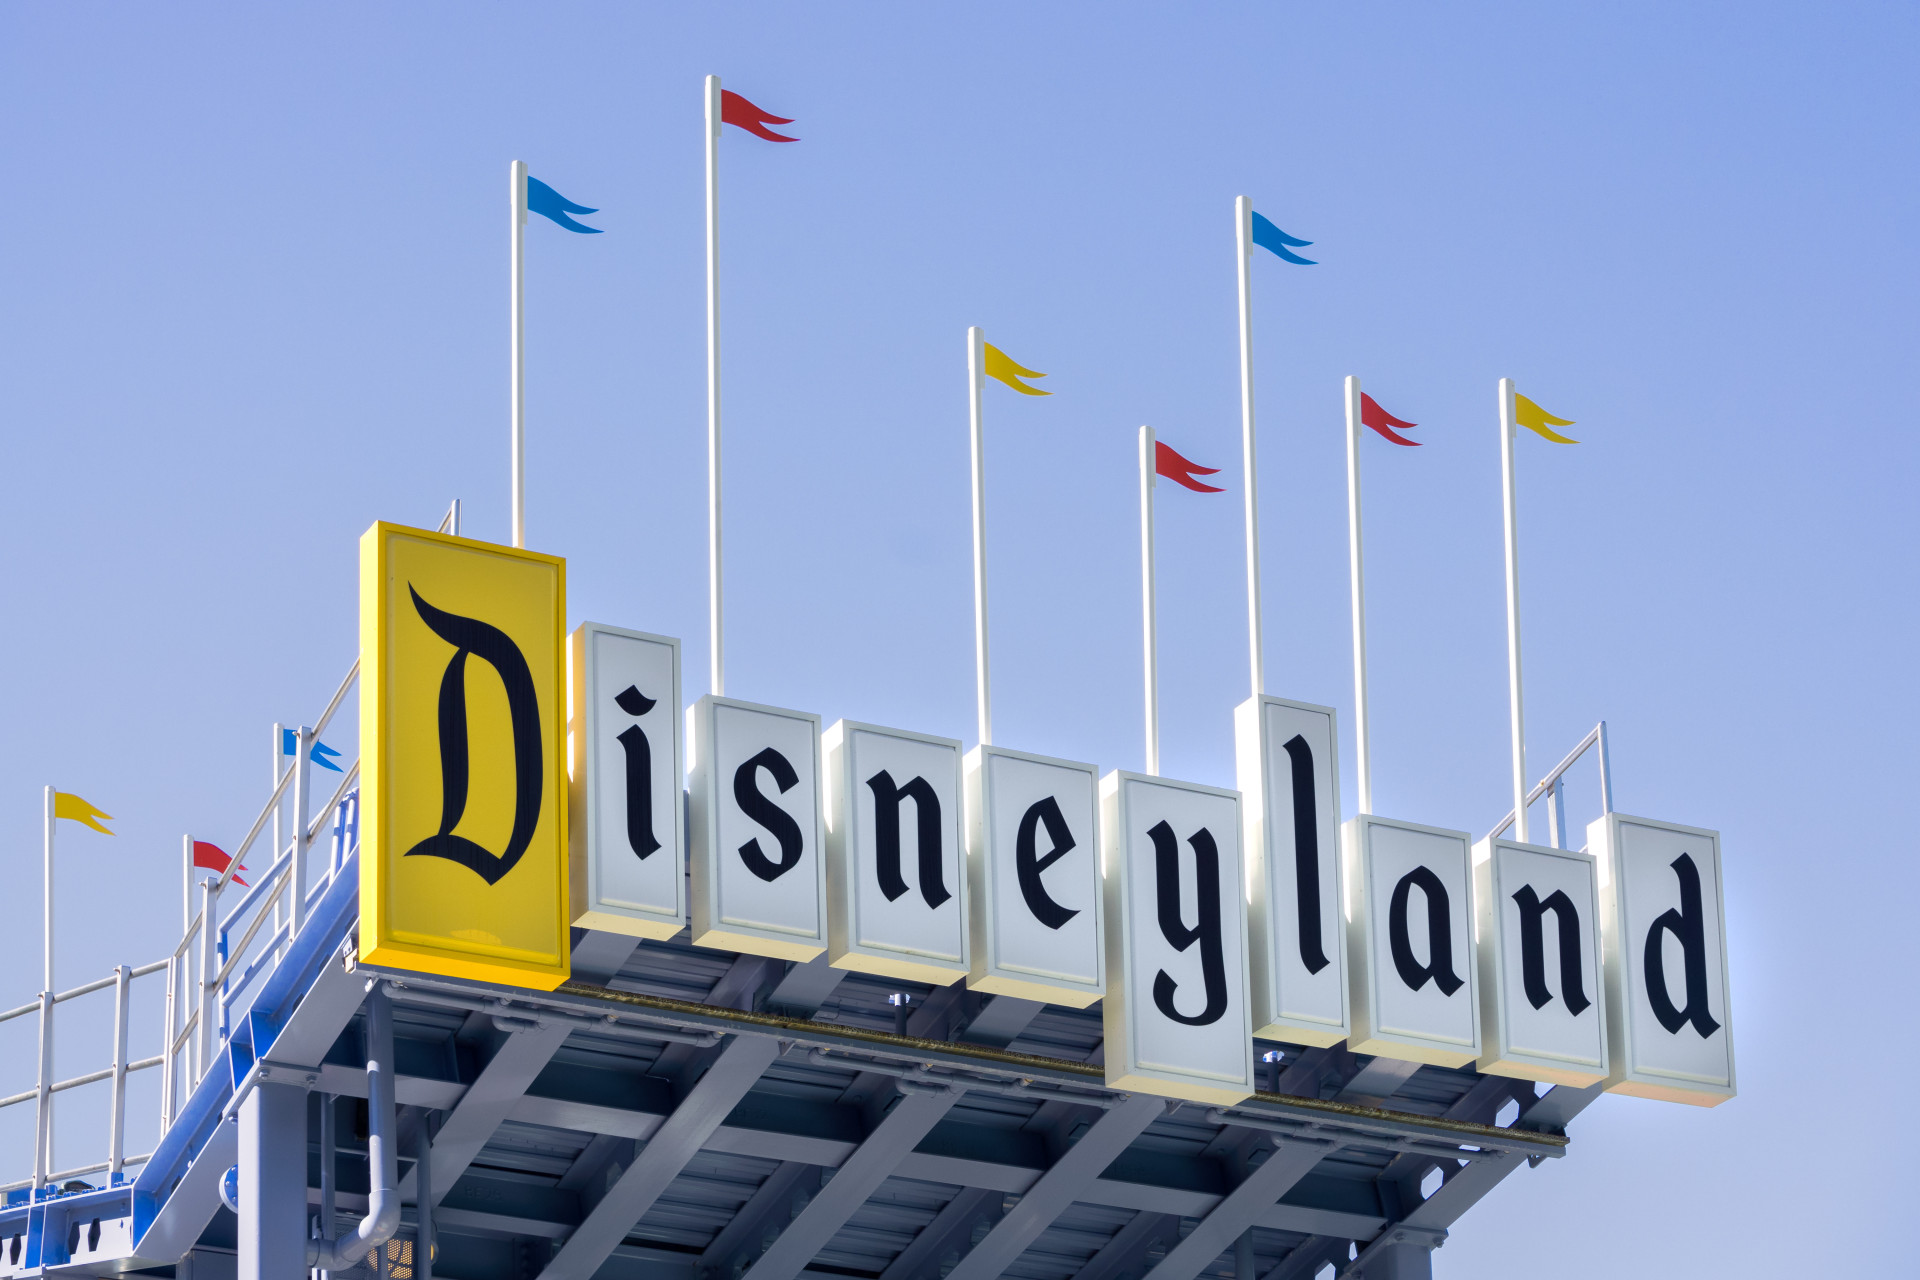 Not too far from the city you can go to the happiest place on Earth, Disneyland.<p><a href="https://www.msn.com/en-us/community/channel/vid-7xx8mnucu55yw63we9va2gwr7uihbxwc68fxqp25x6tg4ftibpra?cvid=94631541bc0f4f89bfd59158d696ad7e">Follow us and access great exclusive content every day</a></p>